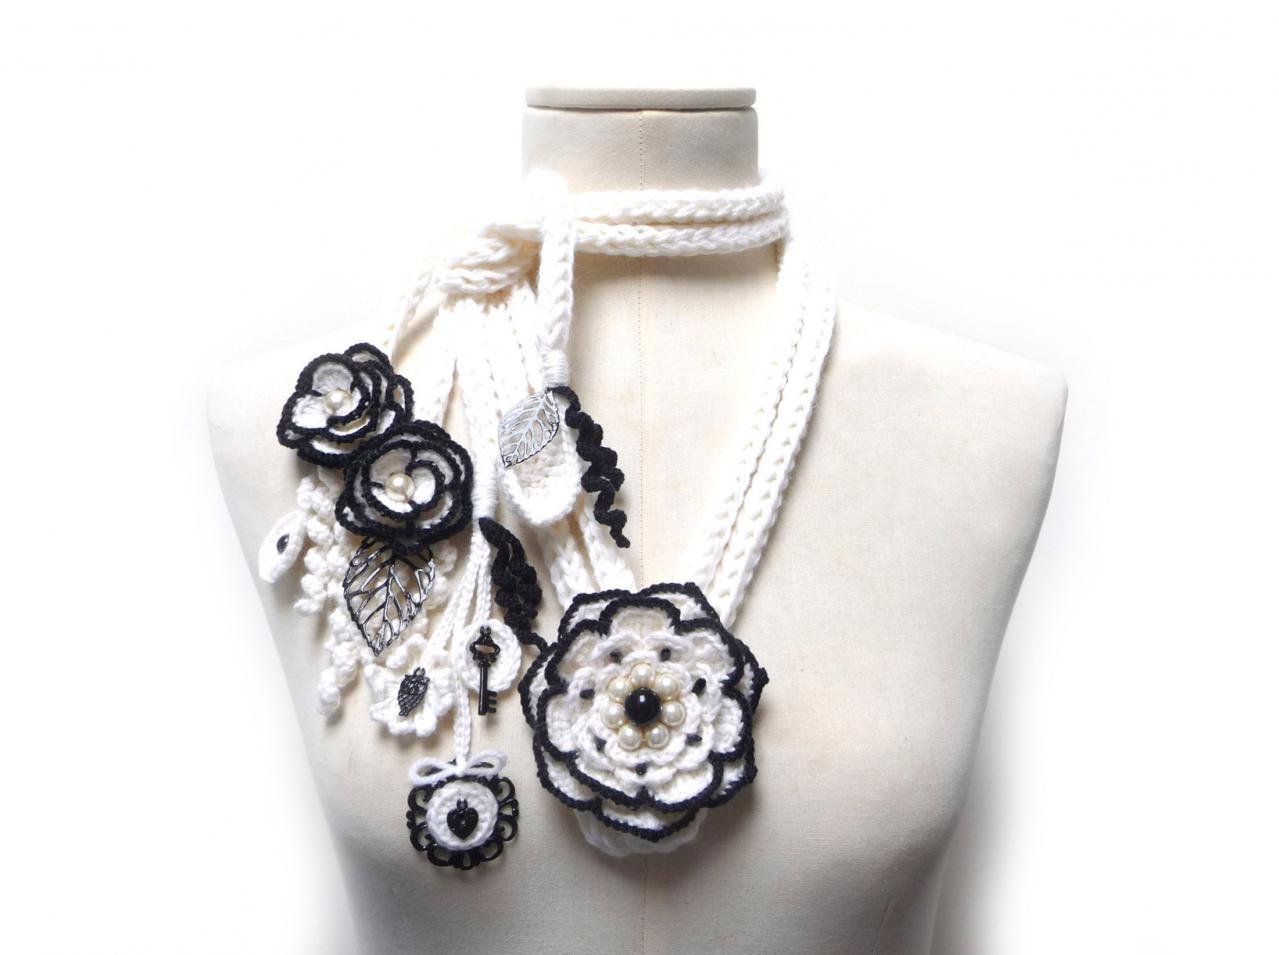 White And Black Crochet Necklace With Flowers, Leaves, Glass Pearls And Charms - Made To Order Crochet Scarf Neckwarmer - Peony